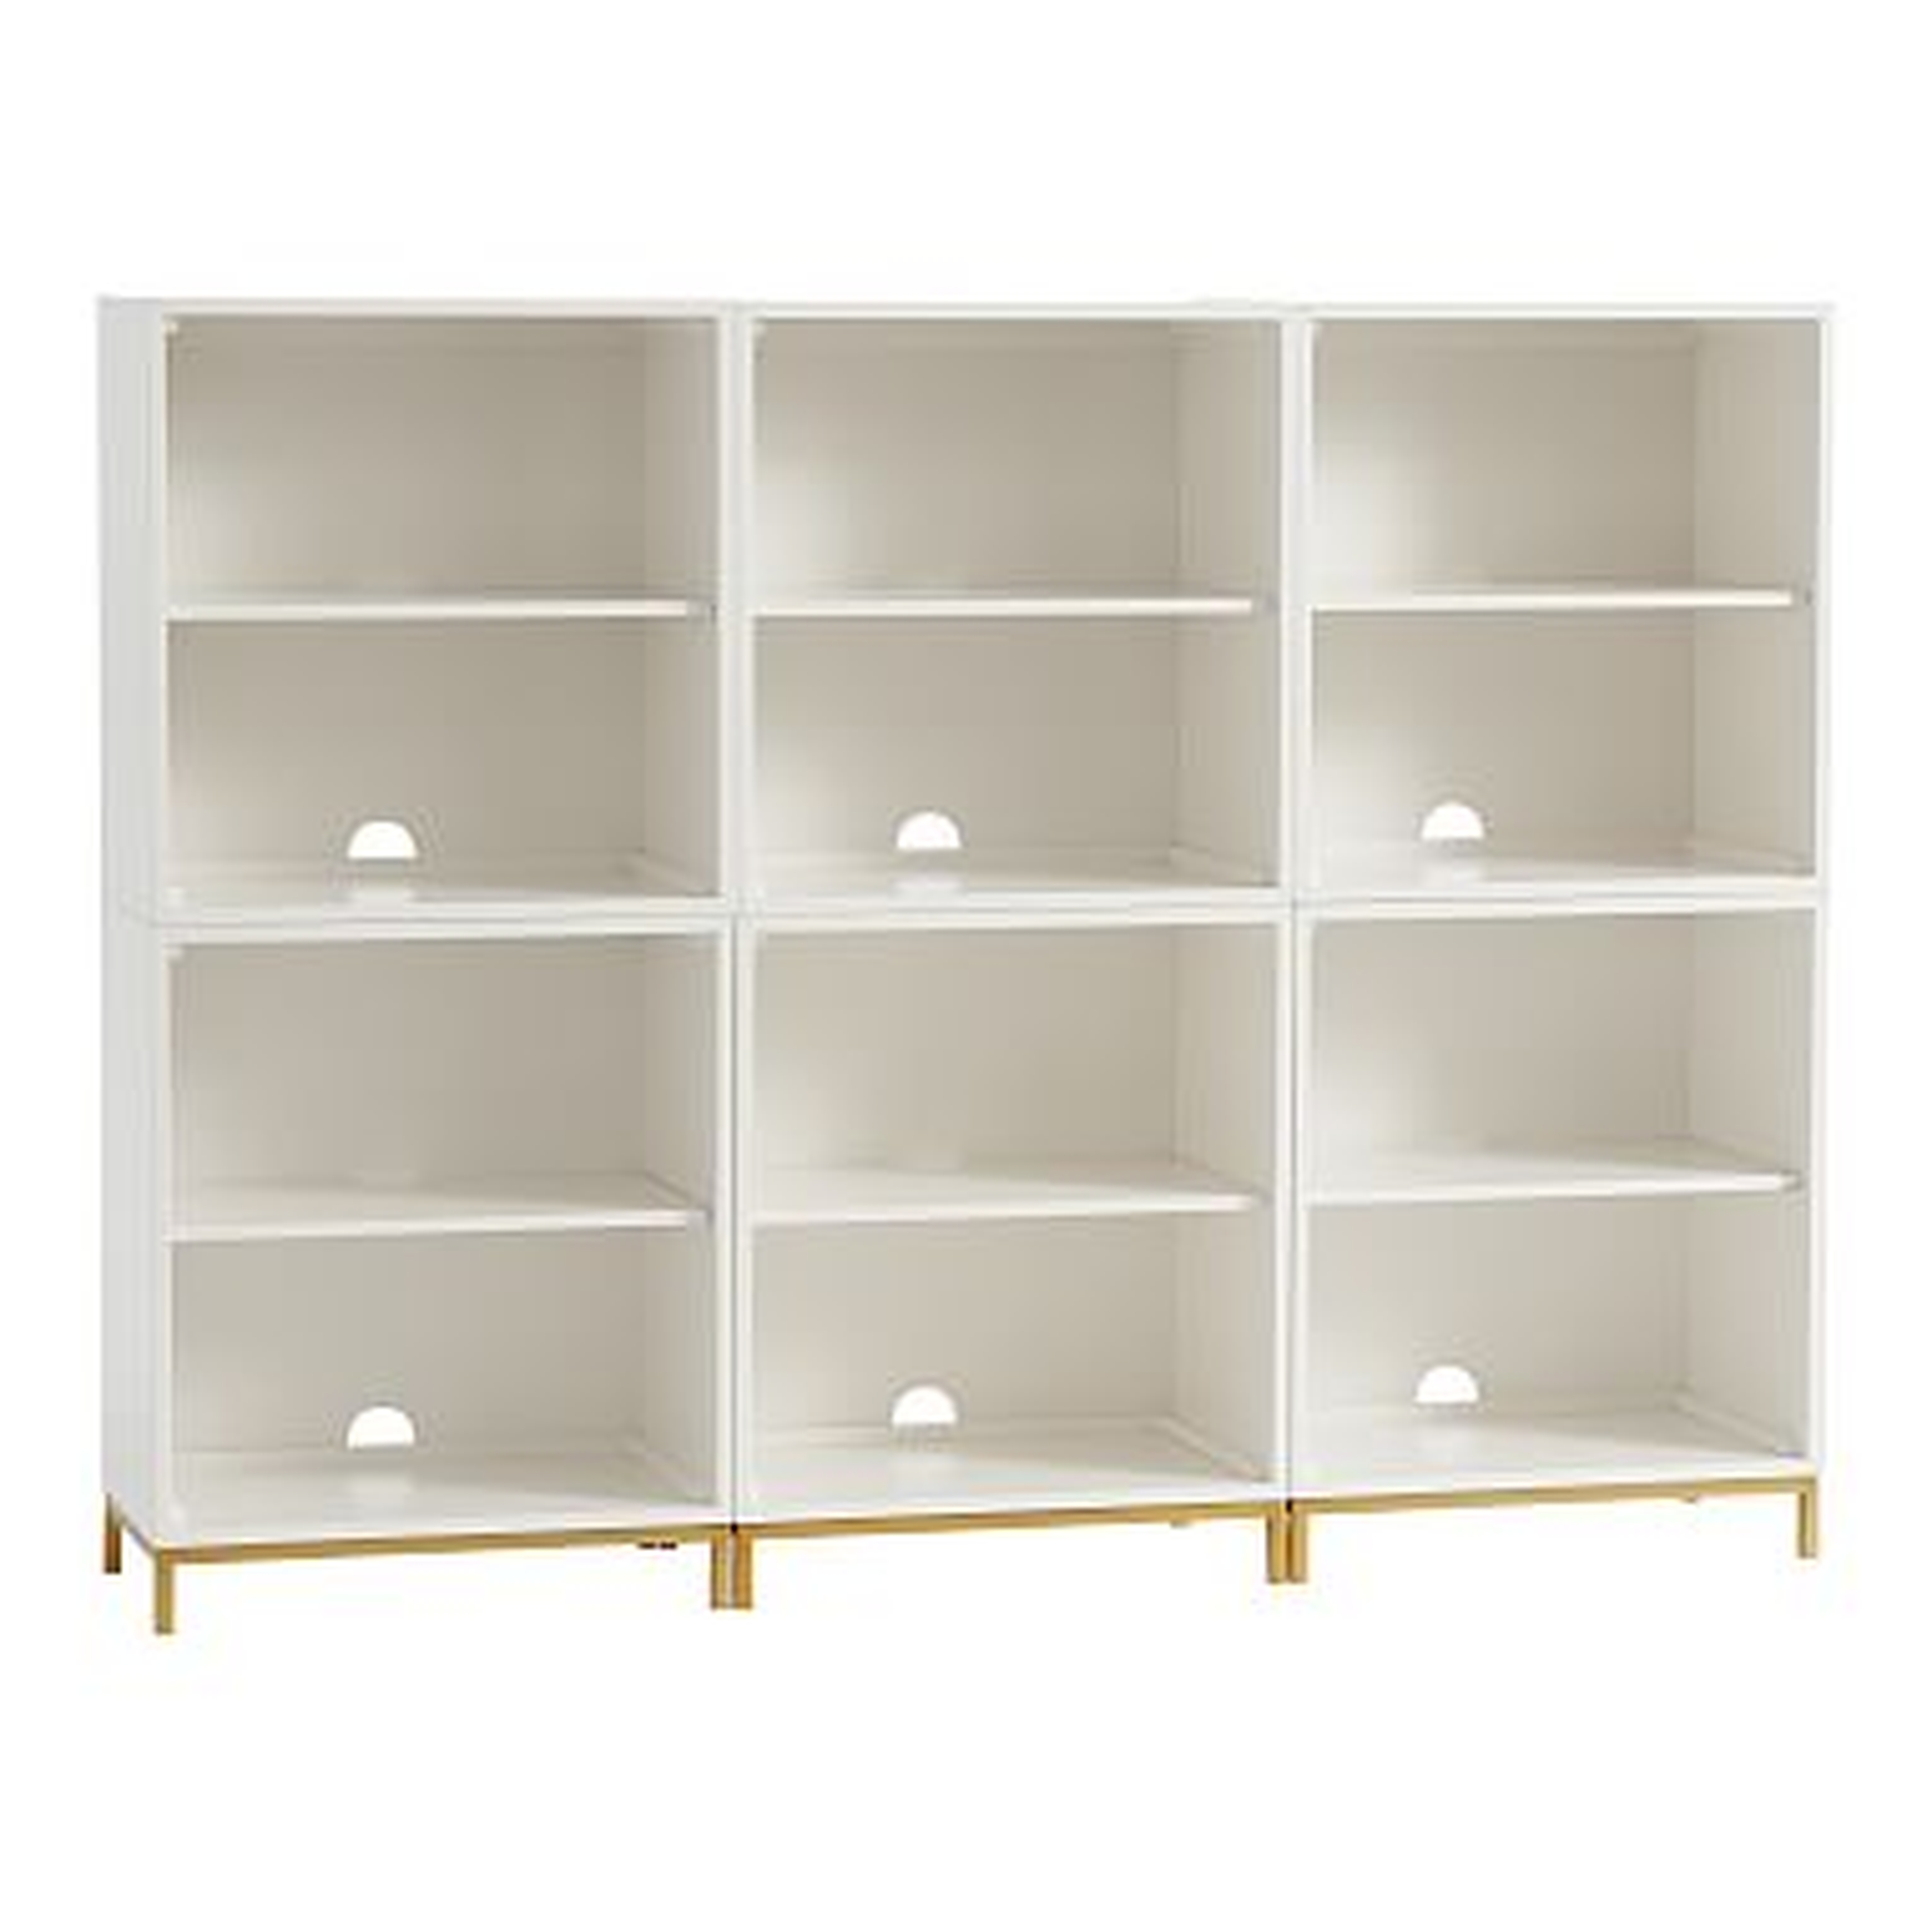 Blaire Triple Tall Bookcase with Shelves 6 Cubbies Simply White - Pottery Barn Teen